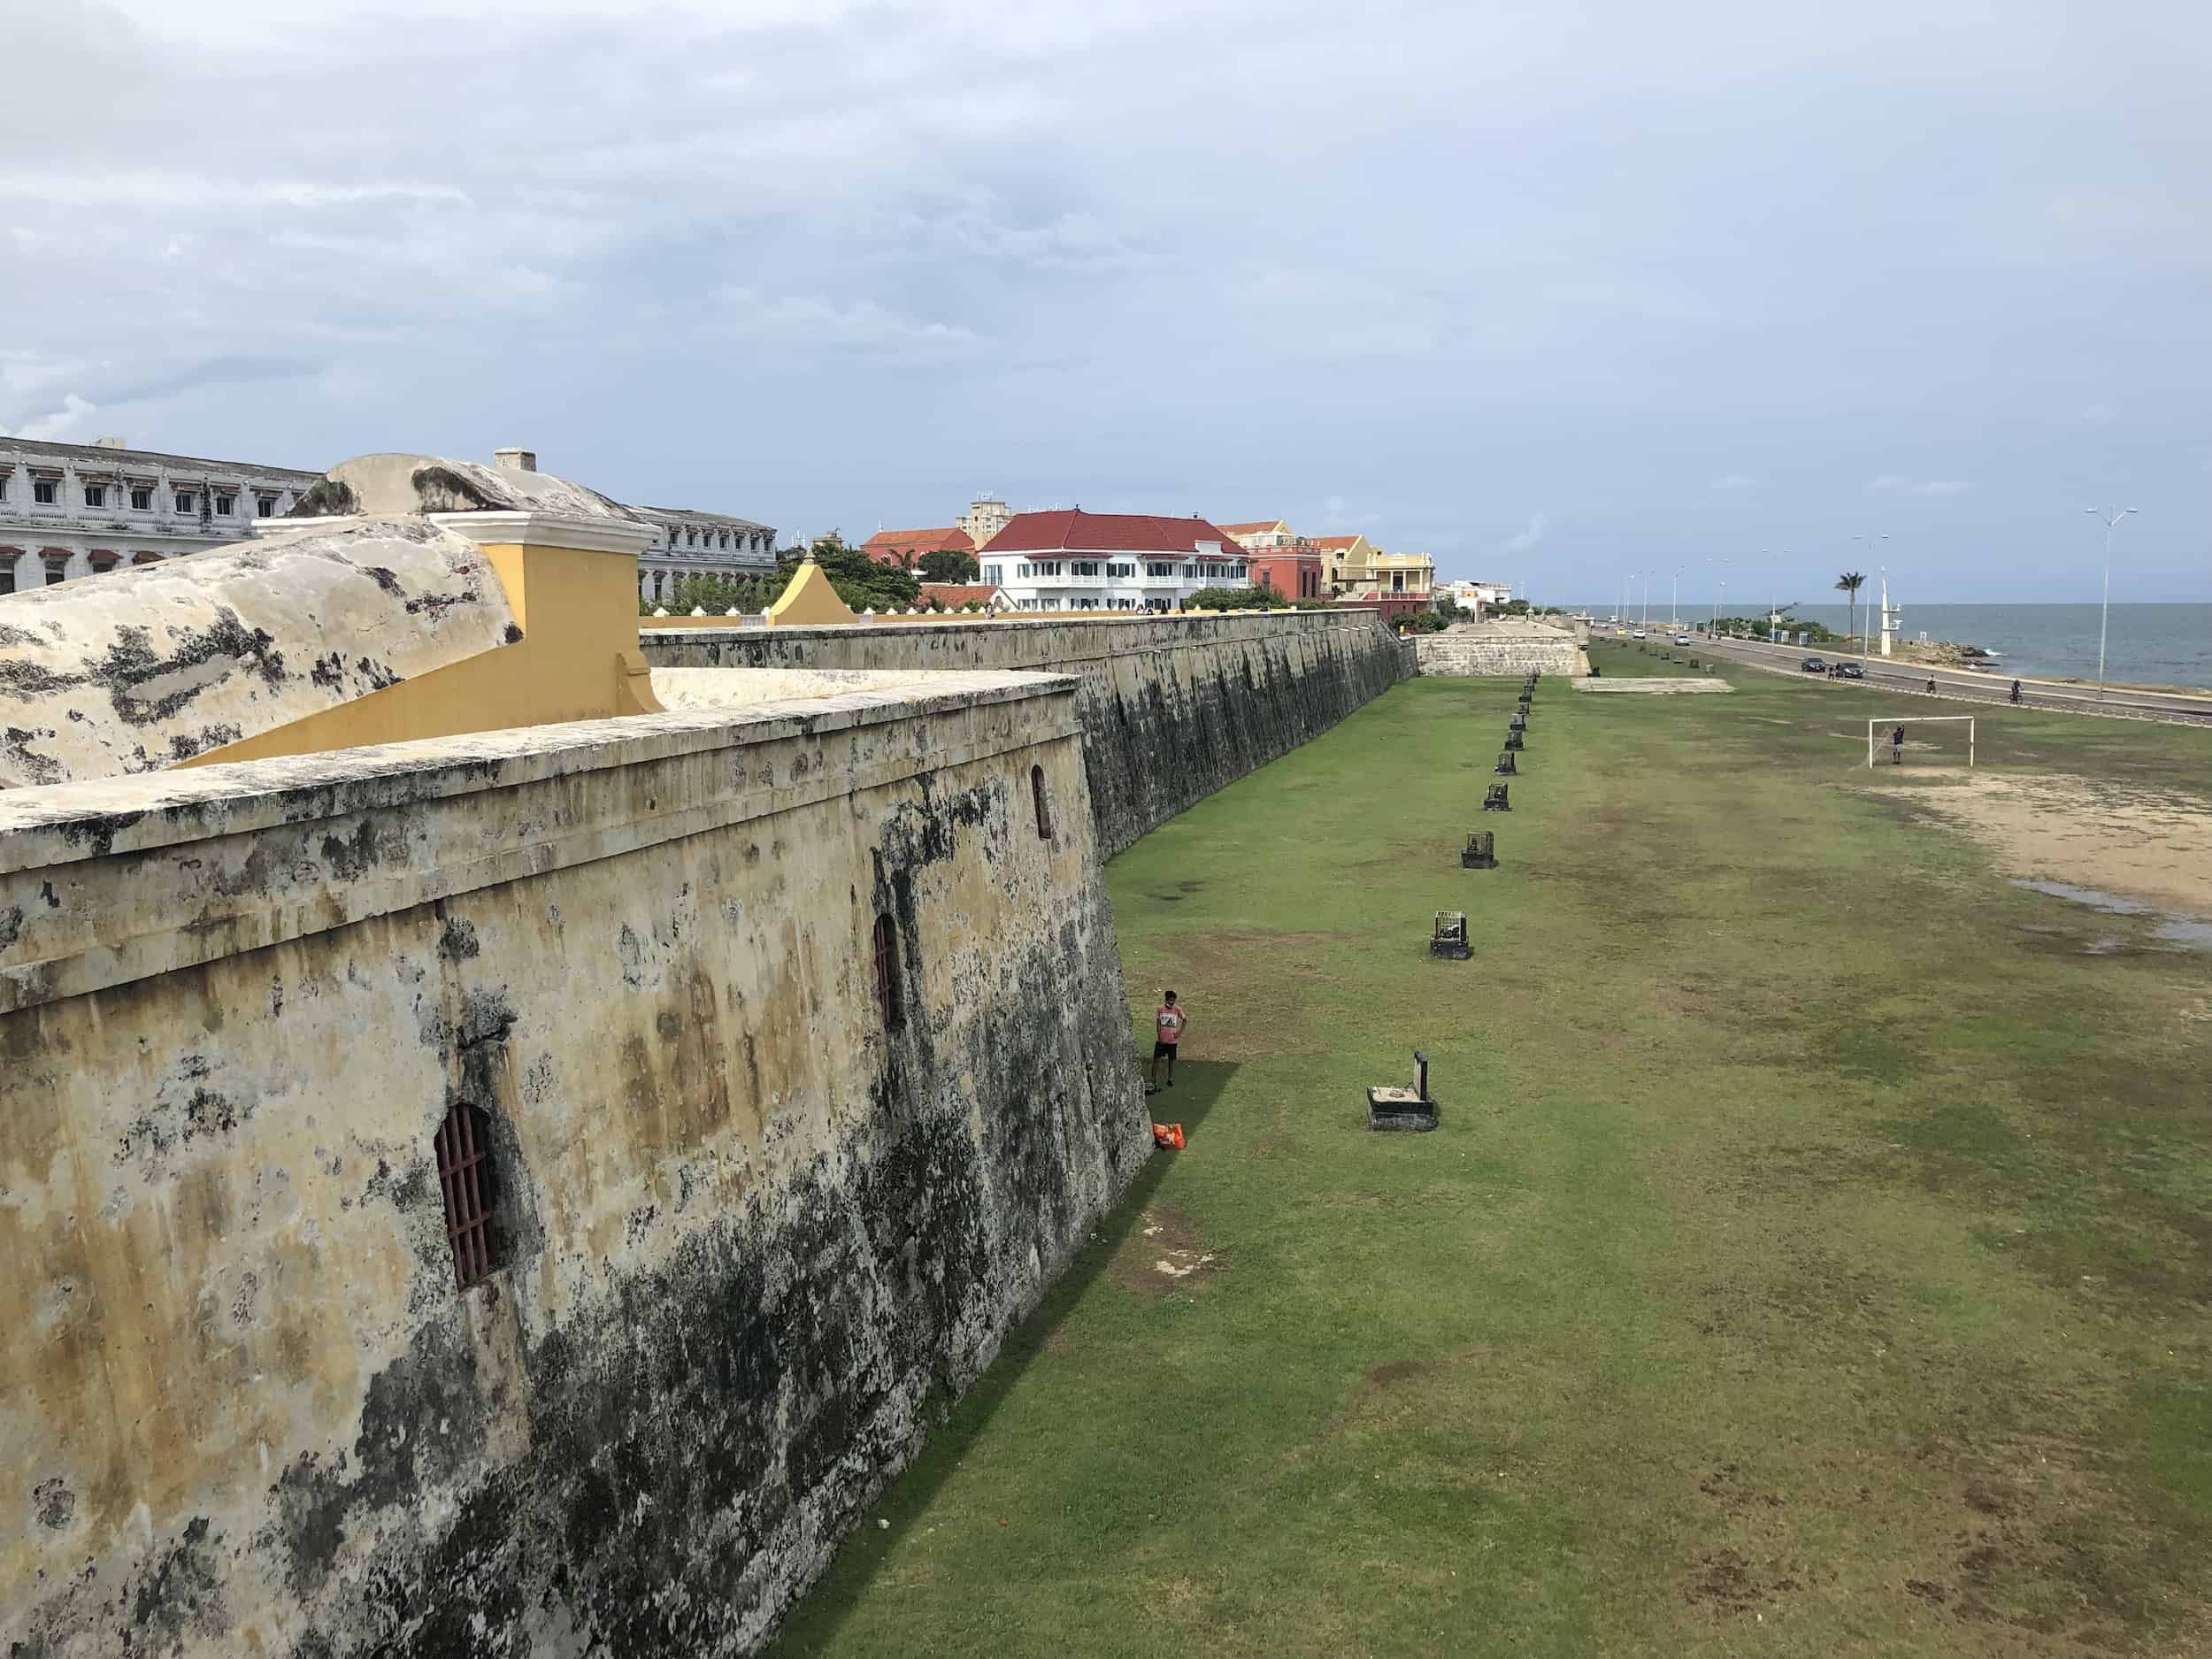 Outer wall of the Bastion of Saint Catherine and Las Bóvedas on the Walls of Cartagena, Colombia